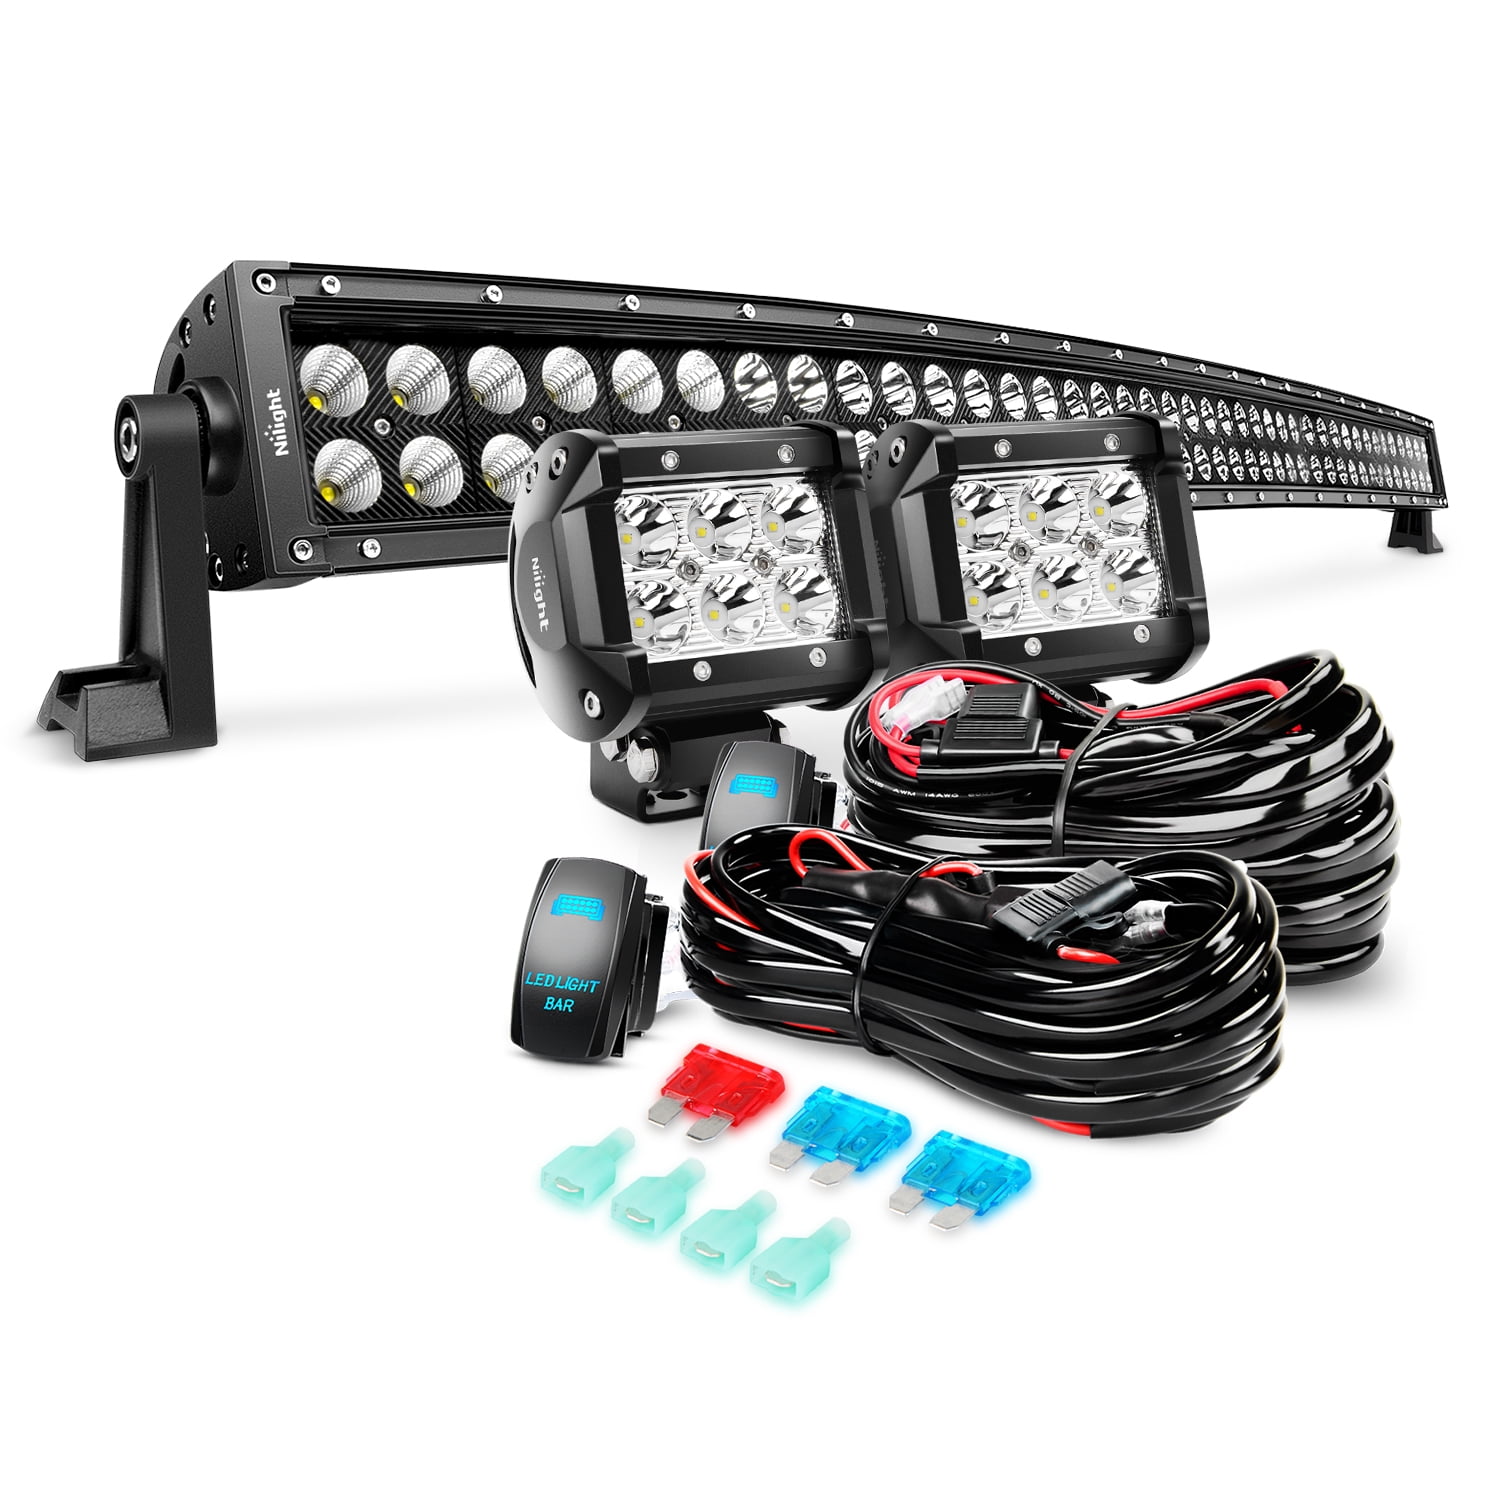 42 Inch 240W Philips Combo Led Light Bar Offroad Truck 4WD ATV w/ 18W Wires Kit